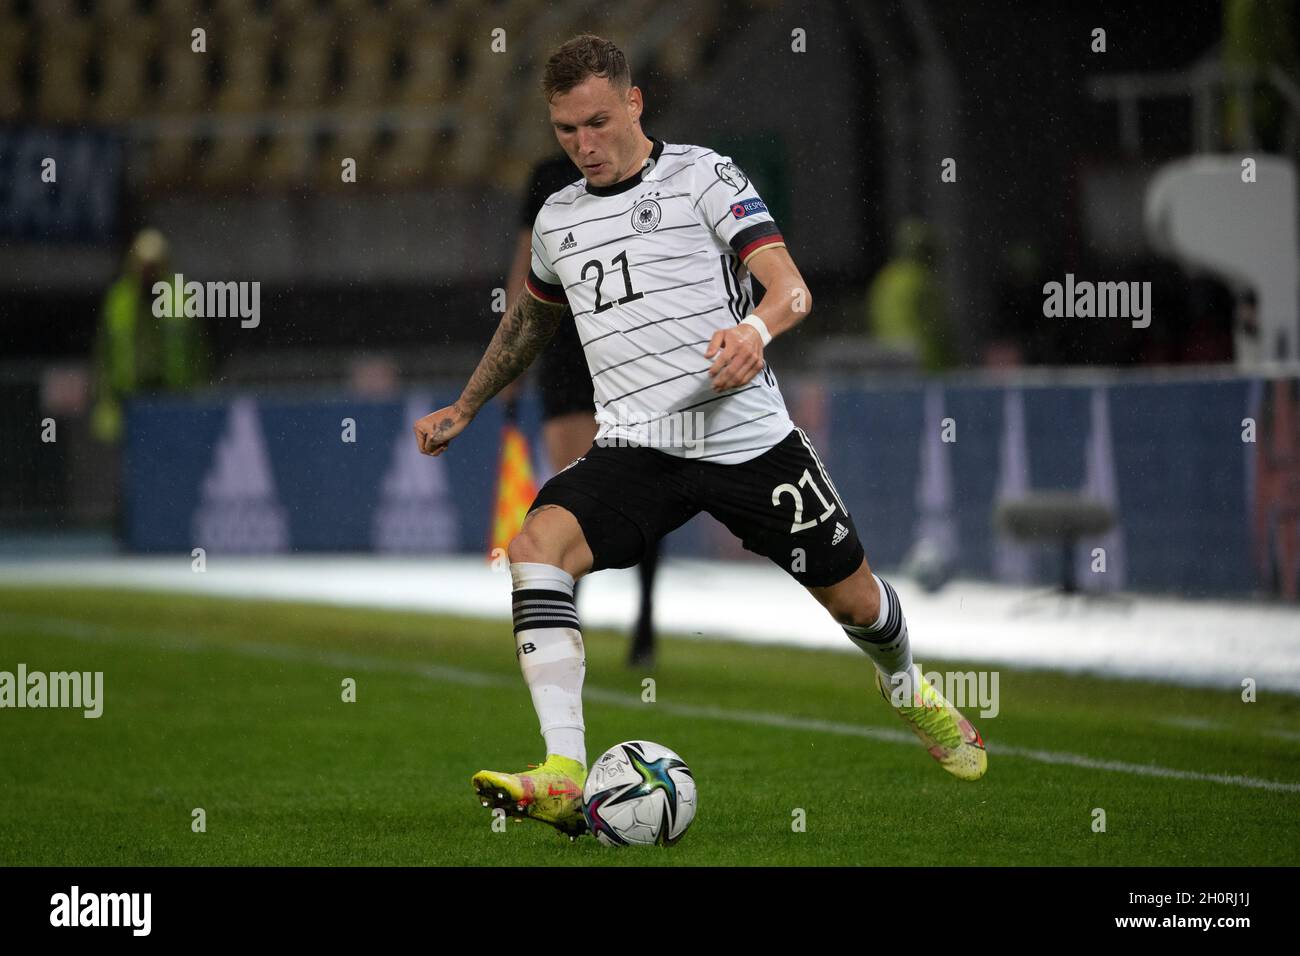 Skopje North Macedonia 11th Oct 21 Football World Cup Qualification Europe North Macedonia Germany Group Stage Group J Matchday 8 At Telekom Arena Germany S David Raum Plays The Ball Credit Federico